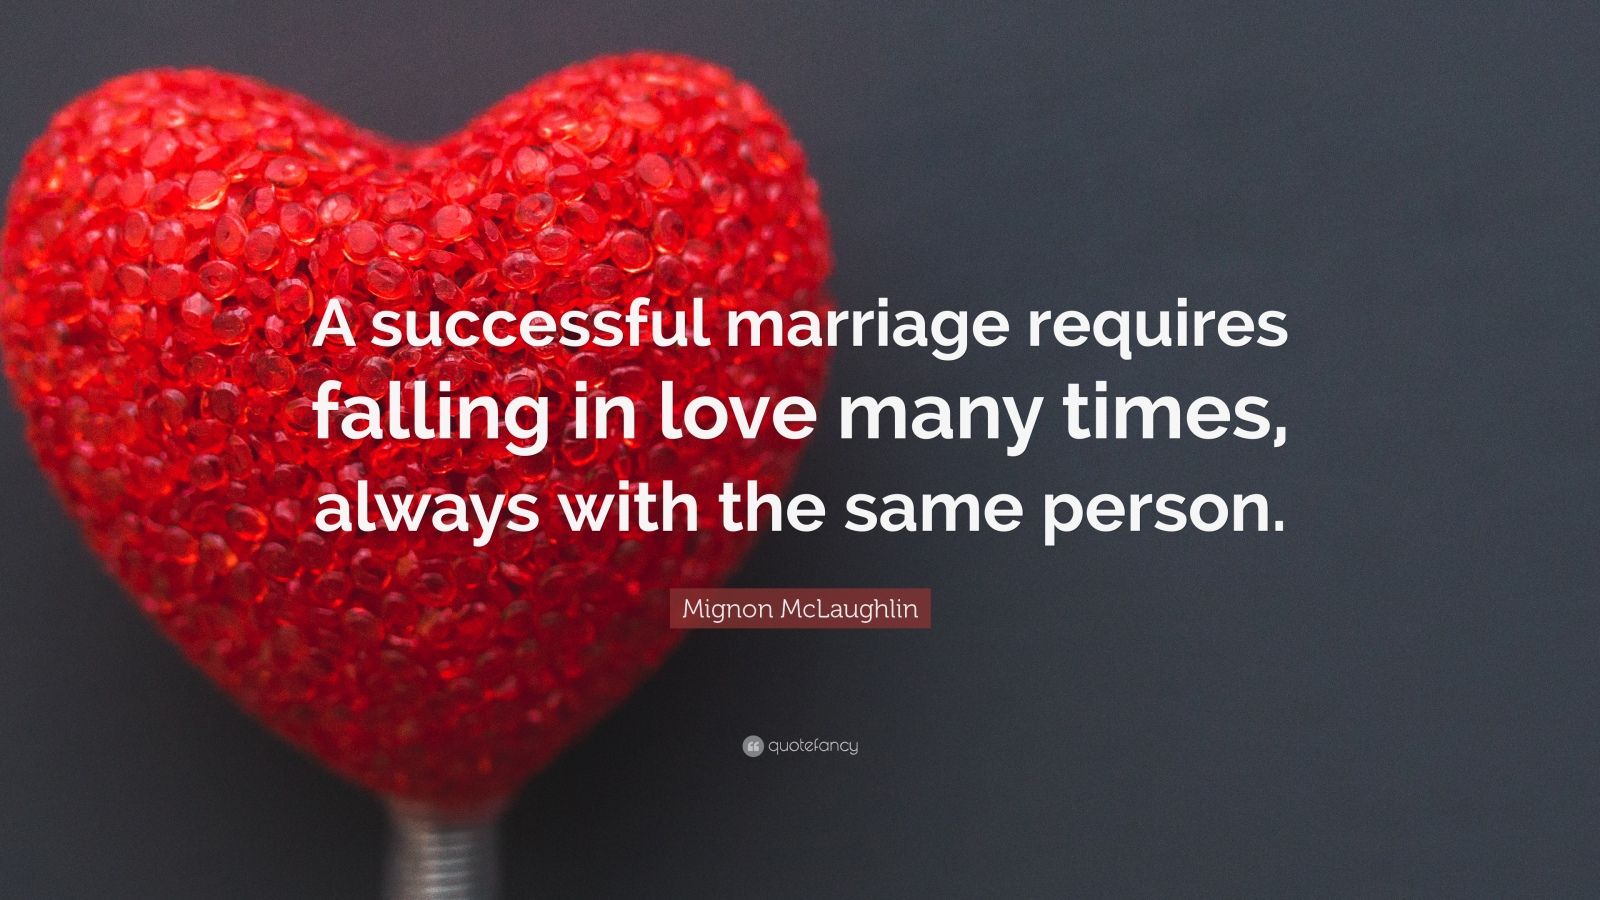 Relationship Quotes “A successful marriage requires falling in love many times always with